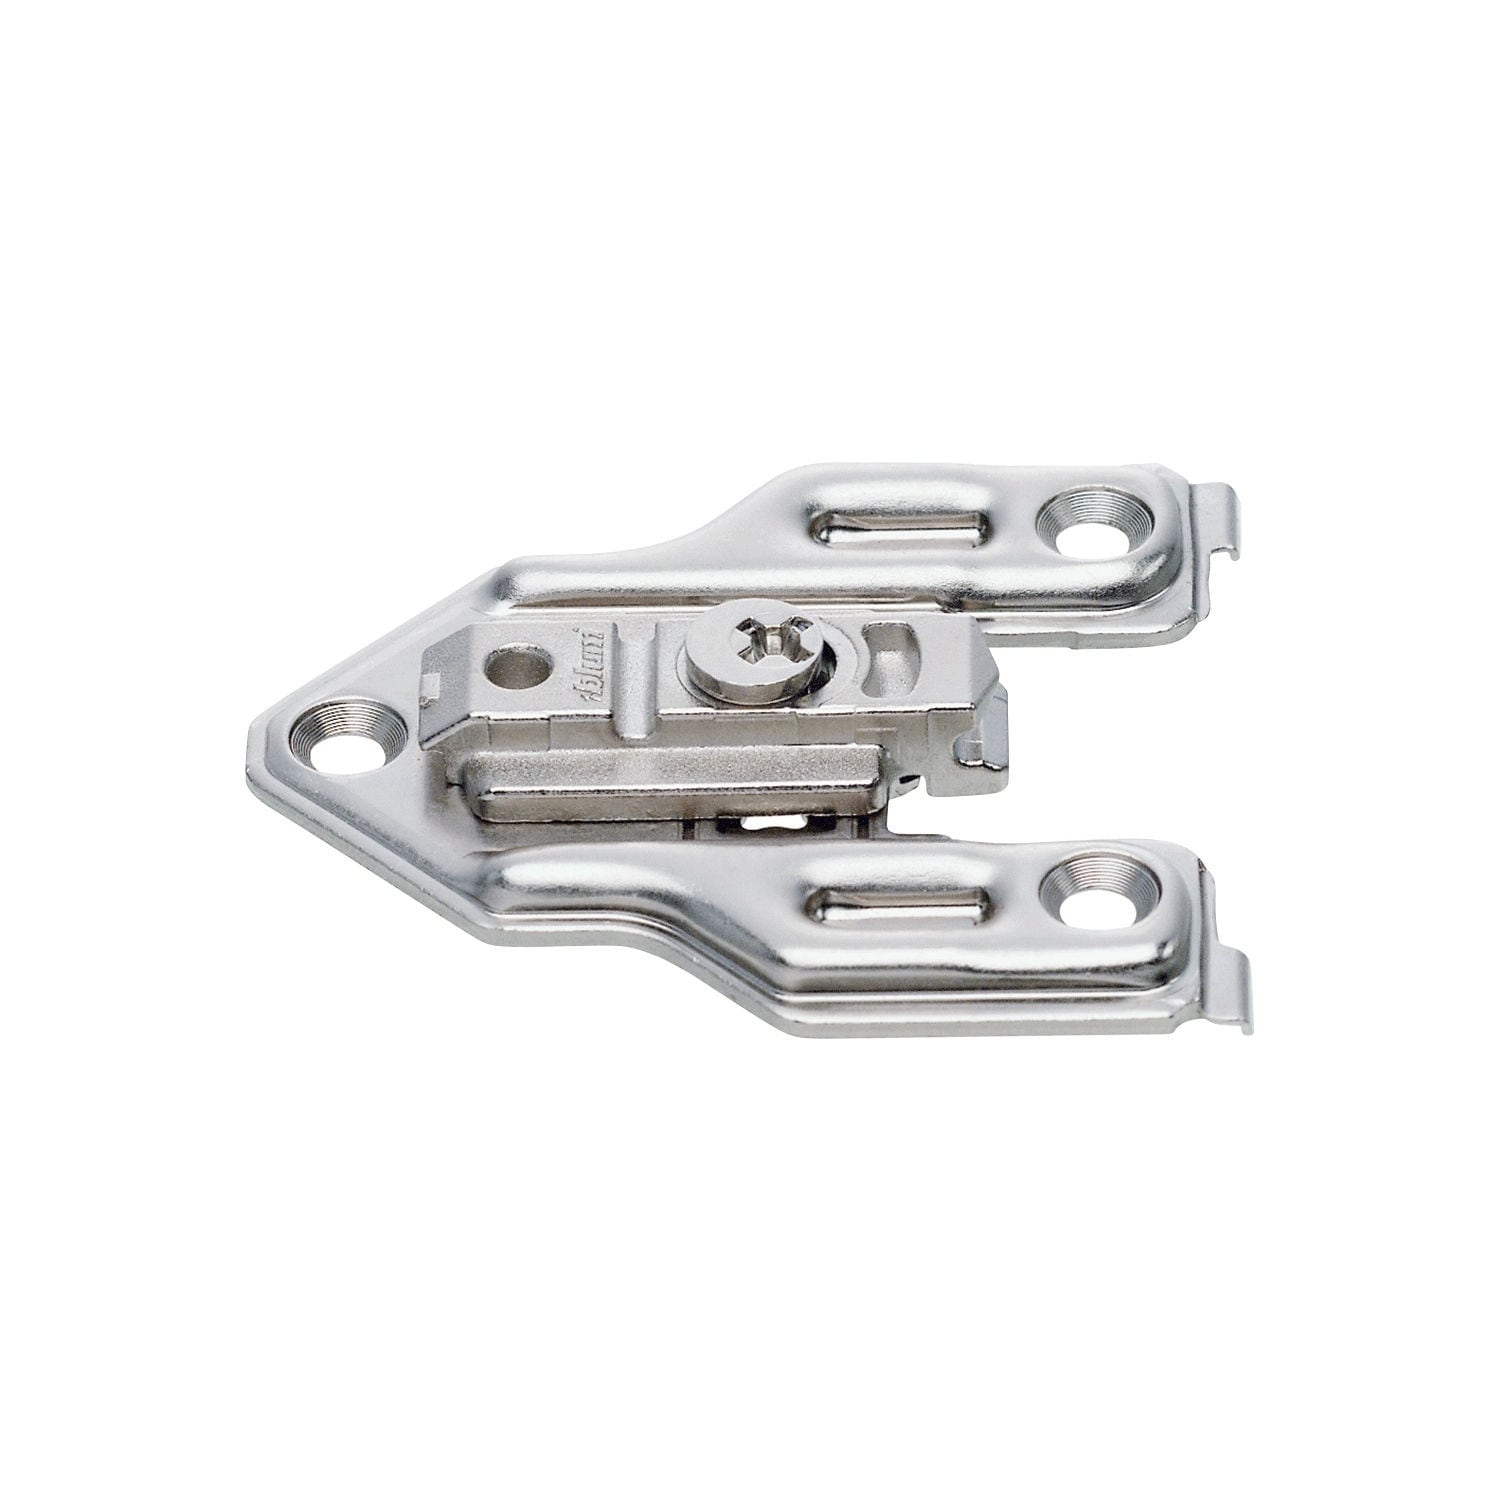 Blum 10-Pack Clip Face Frame Screw-on 0mm Mounting Plate, Nickel Plated - image 2 of 3